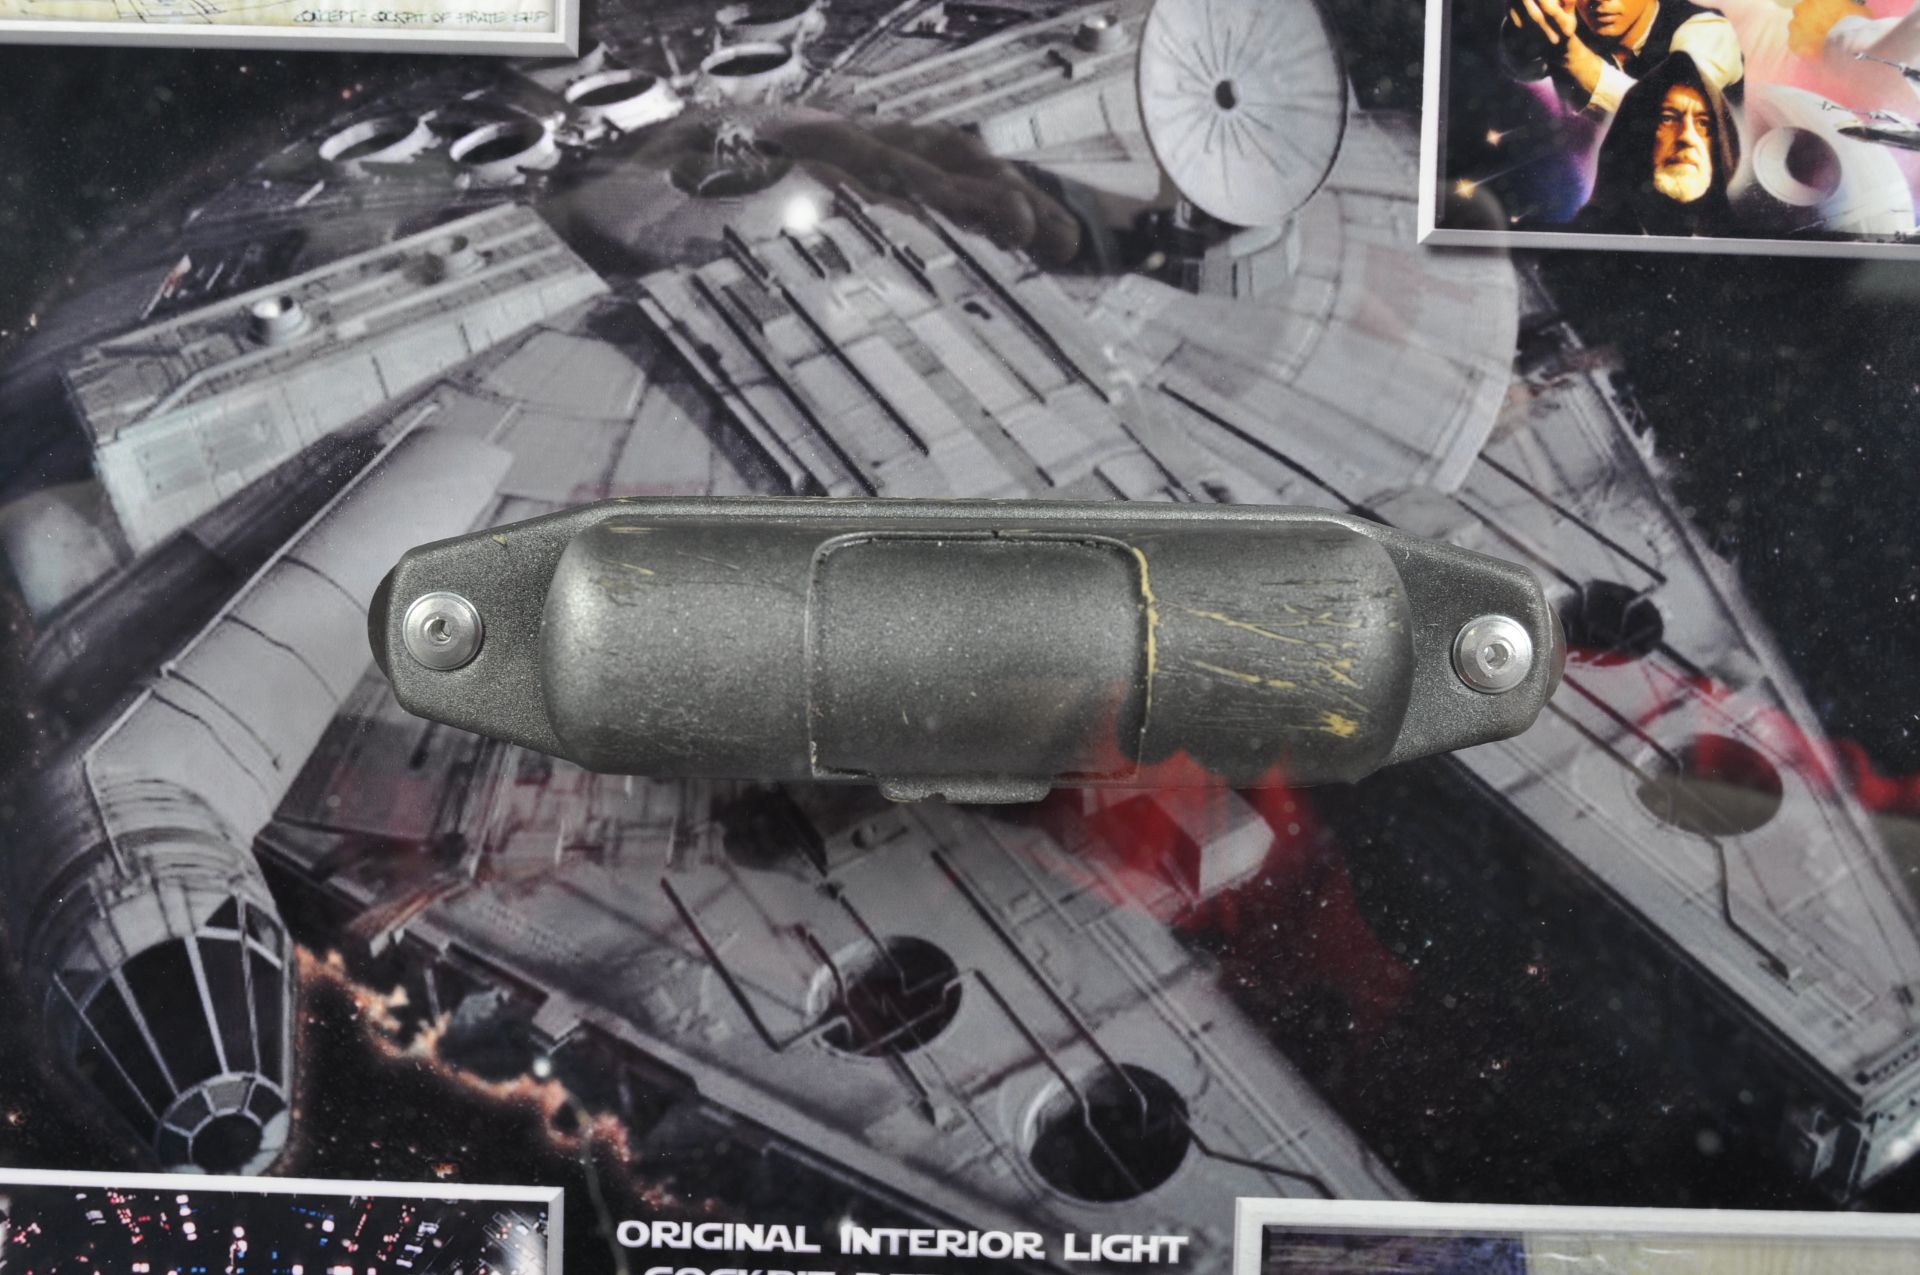 STAR WARS - MILLENNIUM FALCON SECTION PROP DISPLAY - Image 2 of 6